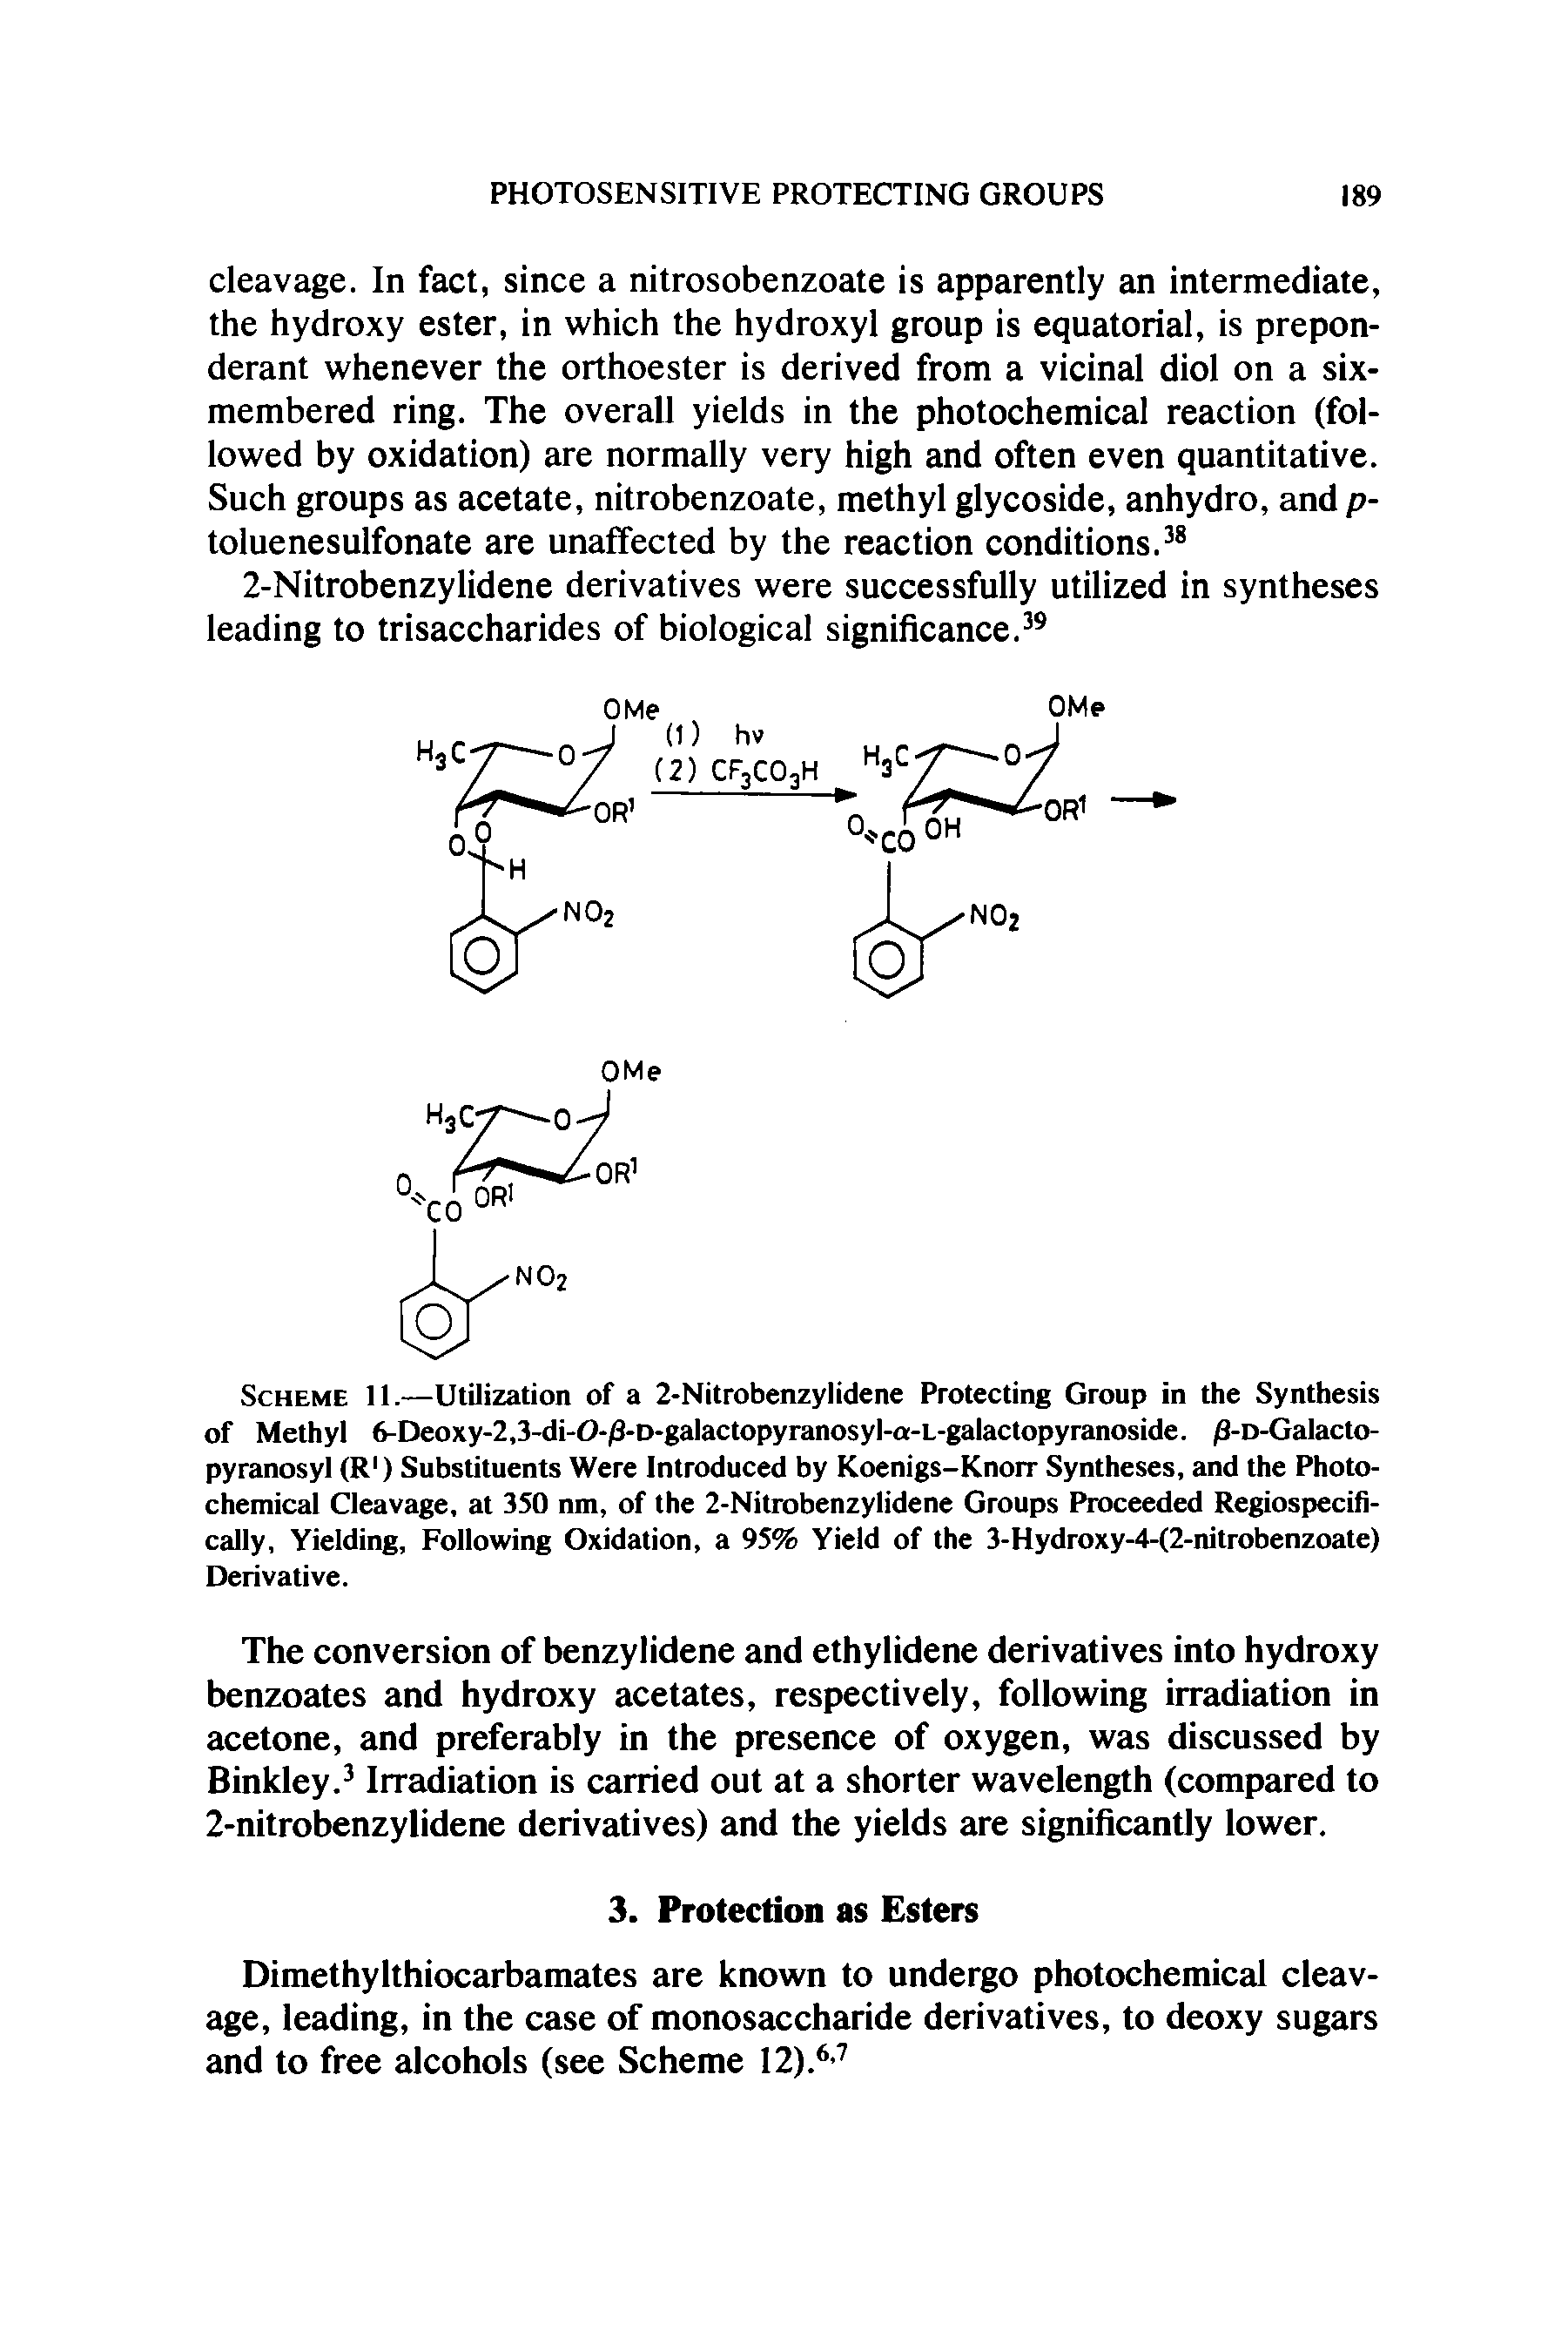 Scheme II.—Utilization of a 2-Nitrobenzylidene Protecting Group in the Synthesis of Methyl 6-Deoxy-2,3-di-0-/3-D-galactopyranosyl-a-L-galactopyranoside. /3-o-GaIacto-pyranosyl (R ) Substituents Were Introduced by Koenigs-Knorr Syntheses, and the Photochemical Cleavage, at 350 nm, of the 2-Nitrobenzylidene Groups Proceeded Regiospecifi-cally. Yielding, Following Oxidation, a 95% Yield of the 3-Hydroxy-4-(2-nitrobenzoate) Derivative.